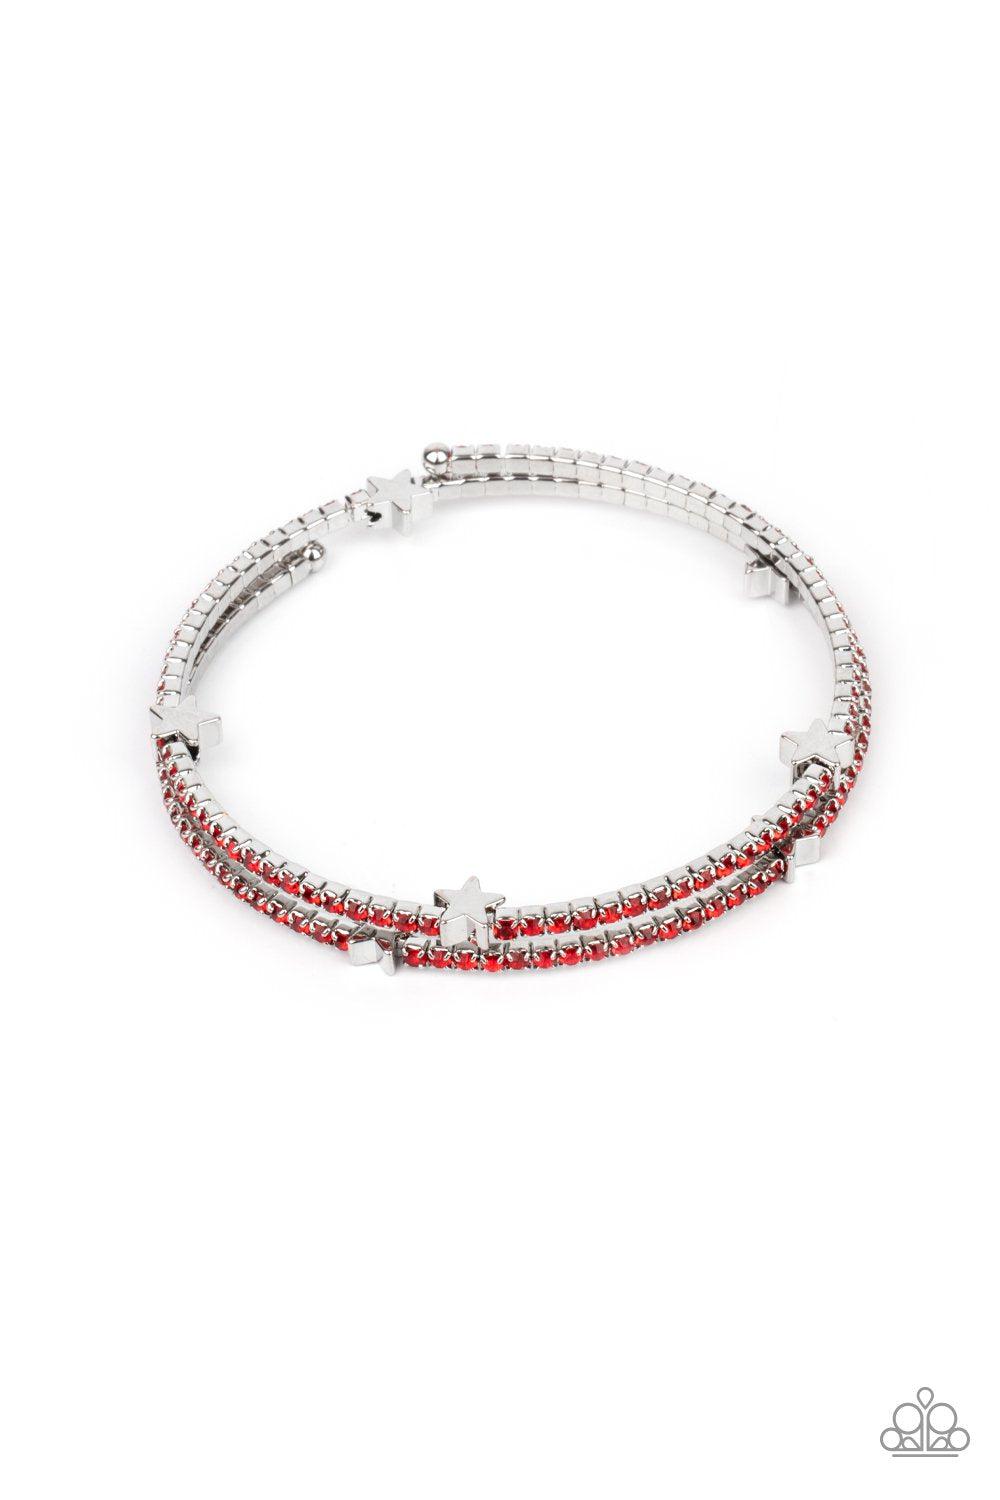 Let Freedom BLING Red Rhinestone and Silver Star Infinity Wrap Bracelet - Paparazzi Accessories- lightbox - CarasShop.com - $5 Jewelry by Cara Jewels